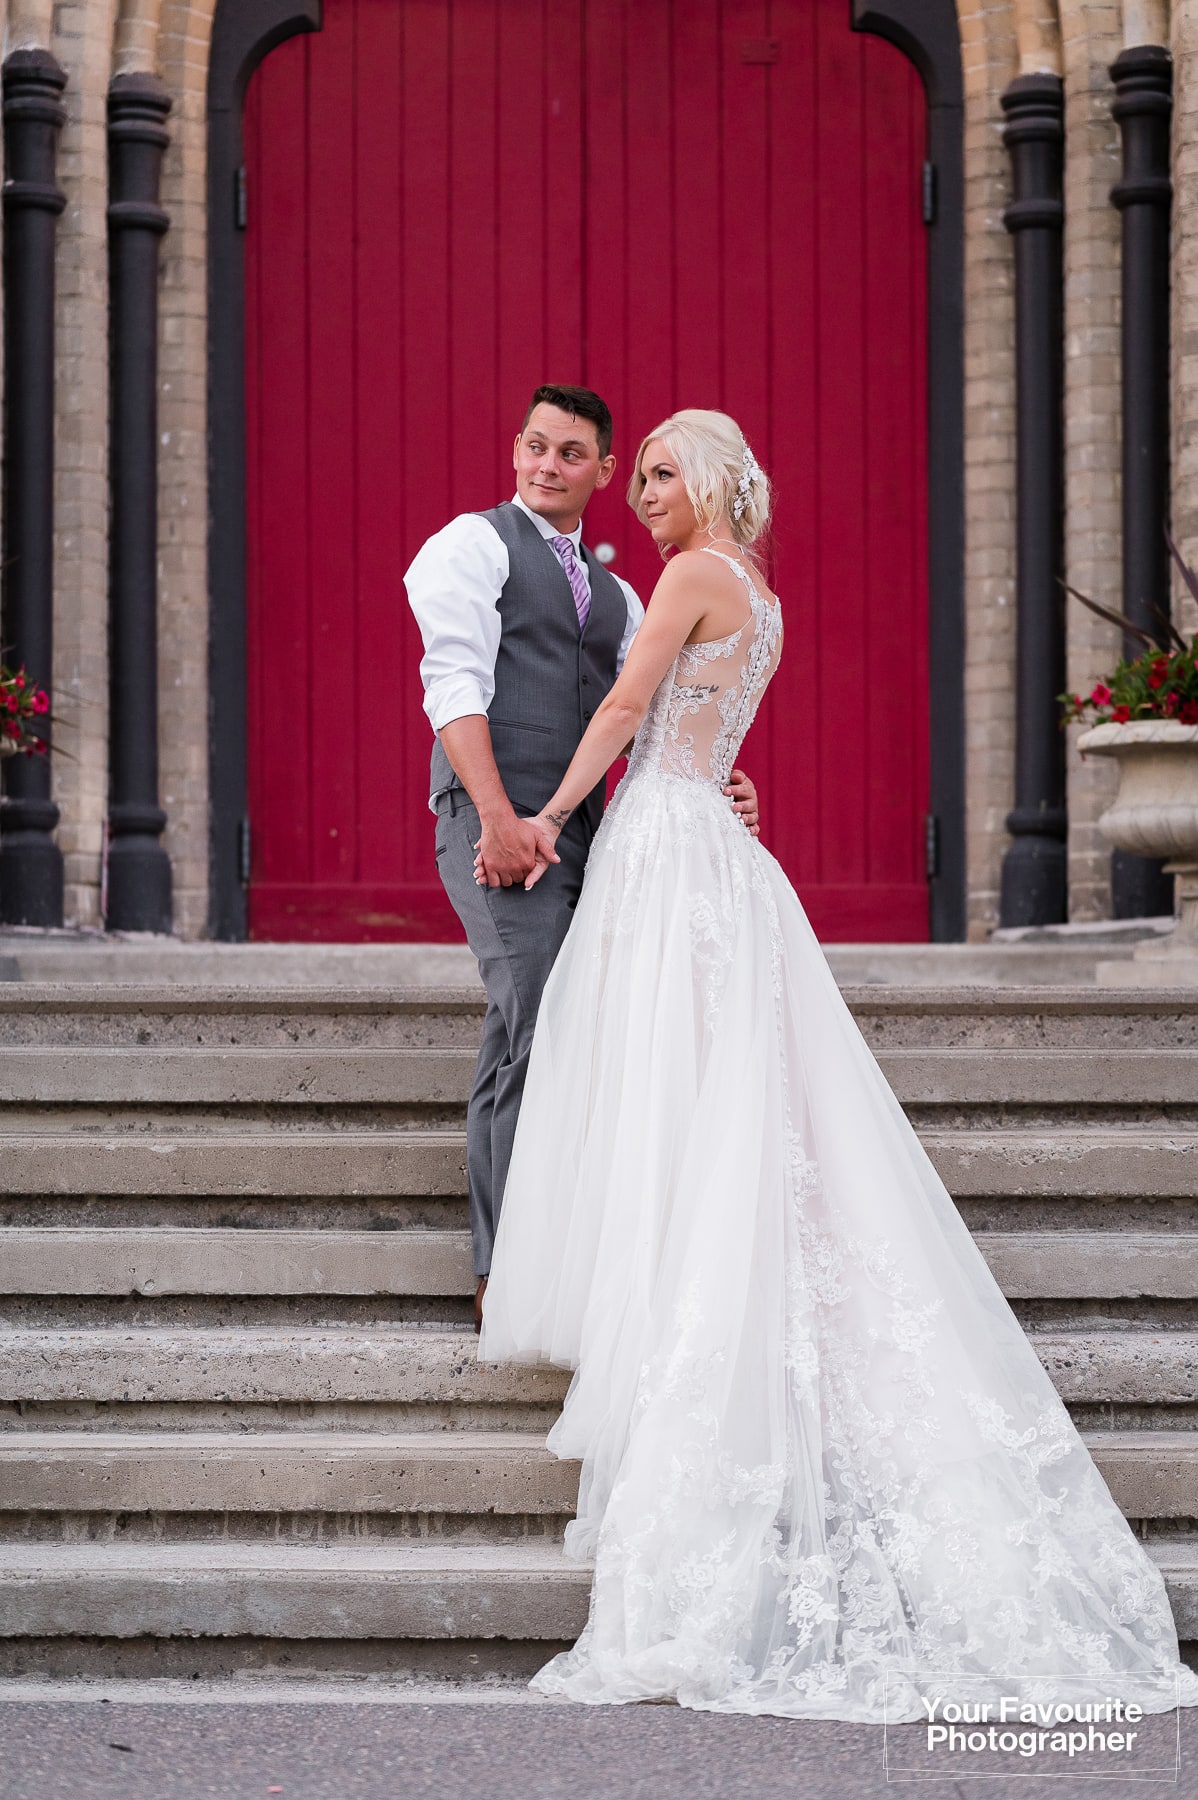 Bride and groom pose in front of the red door at Millbrook Cathedral